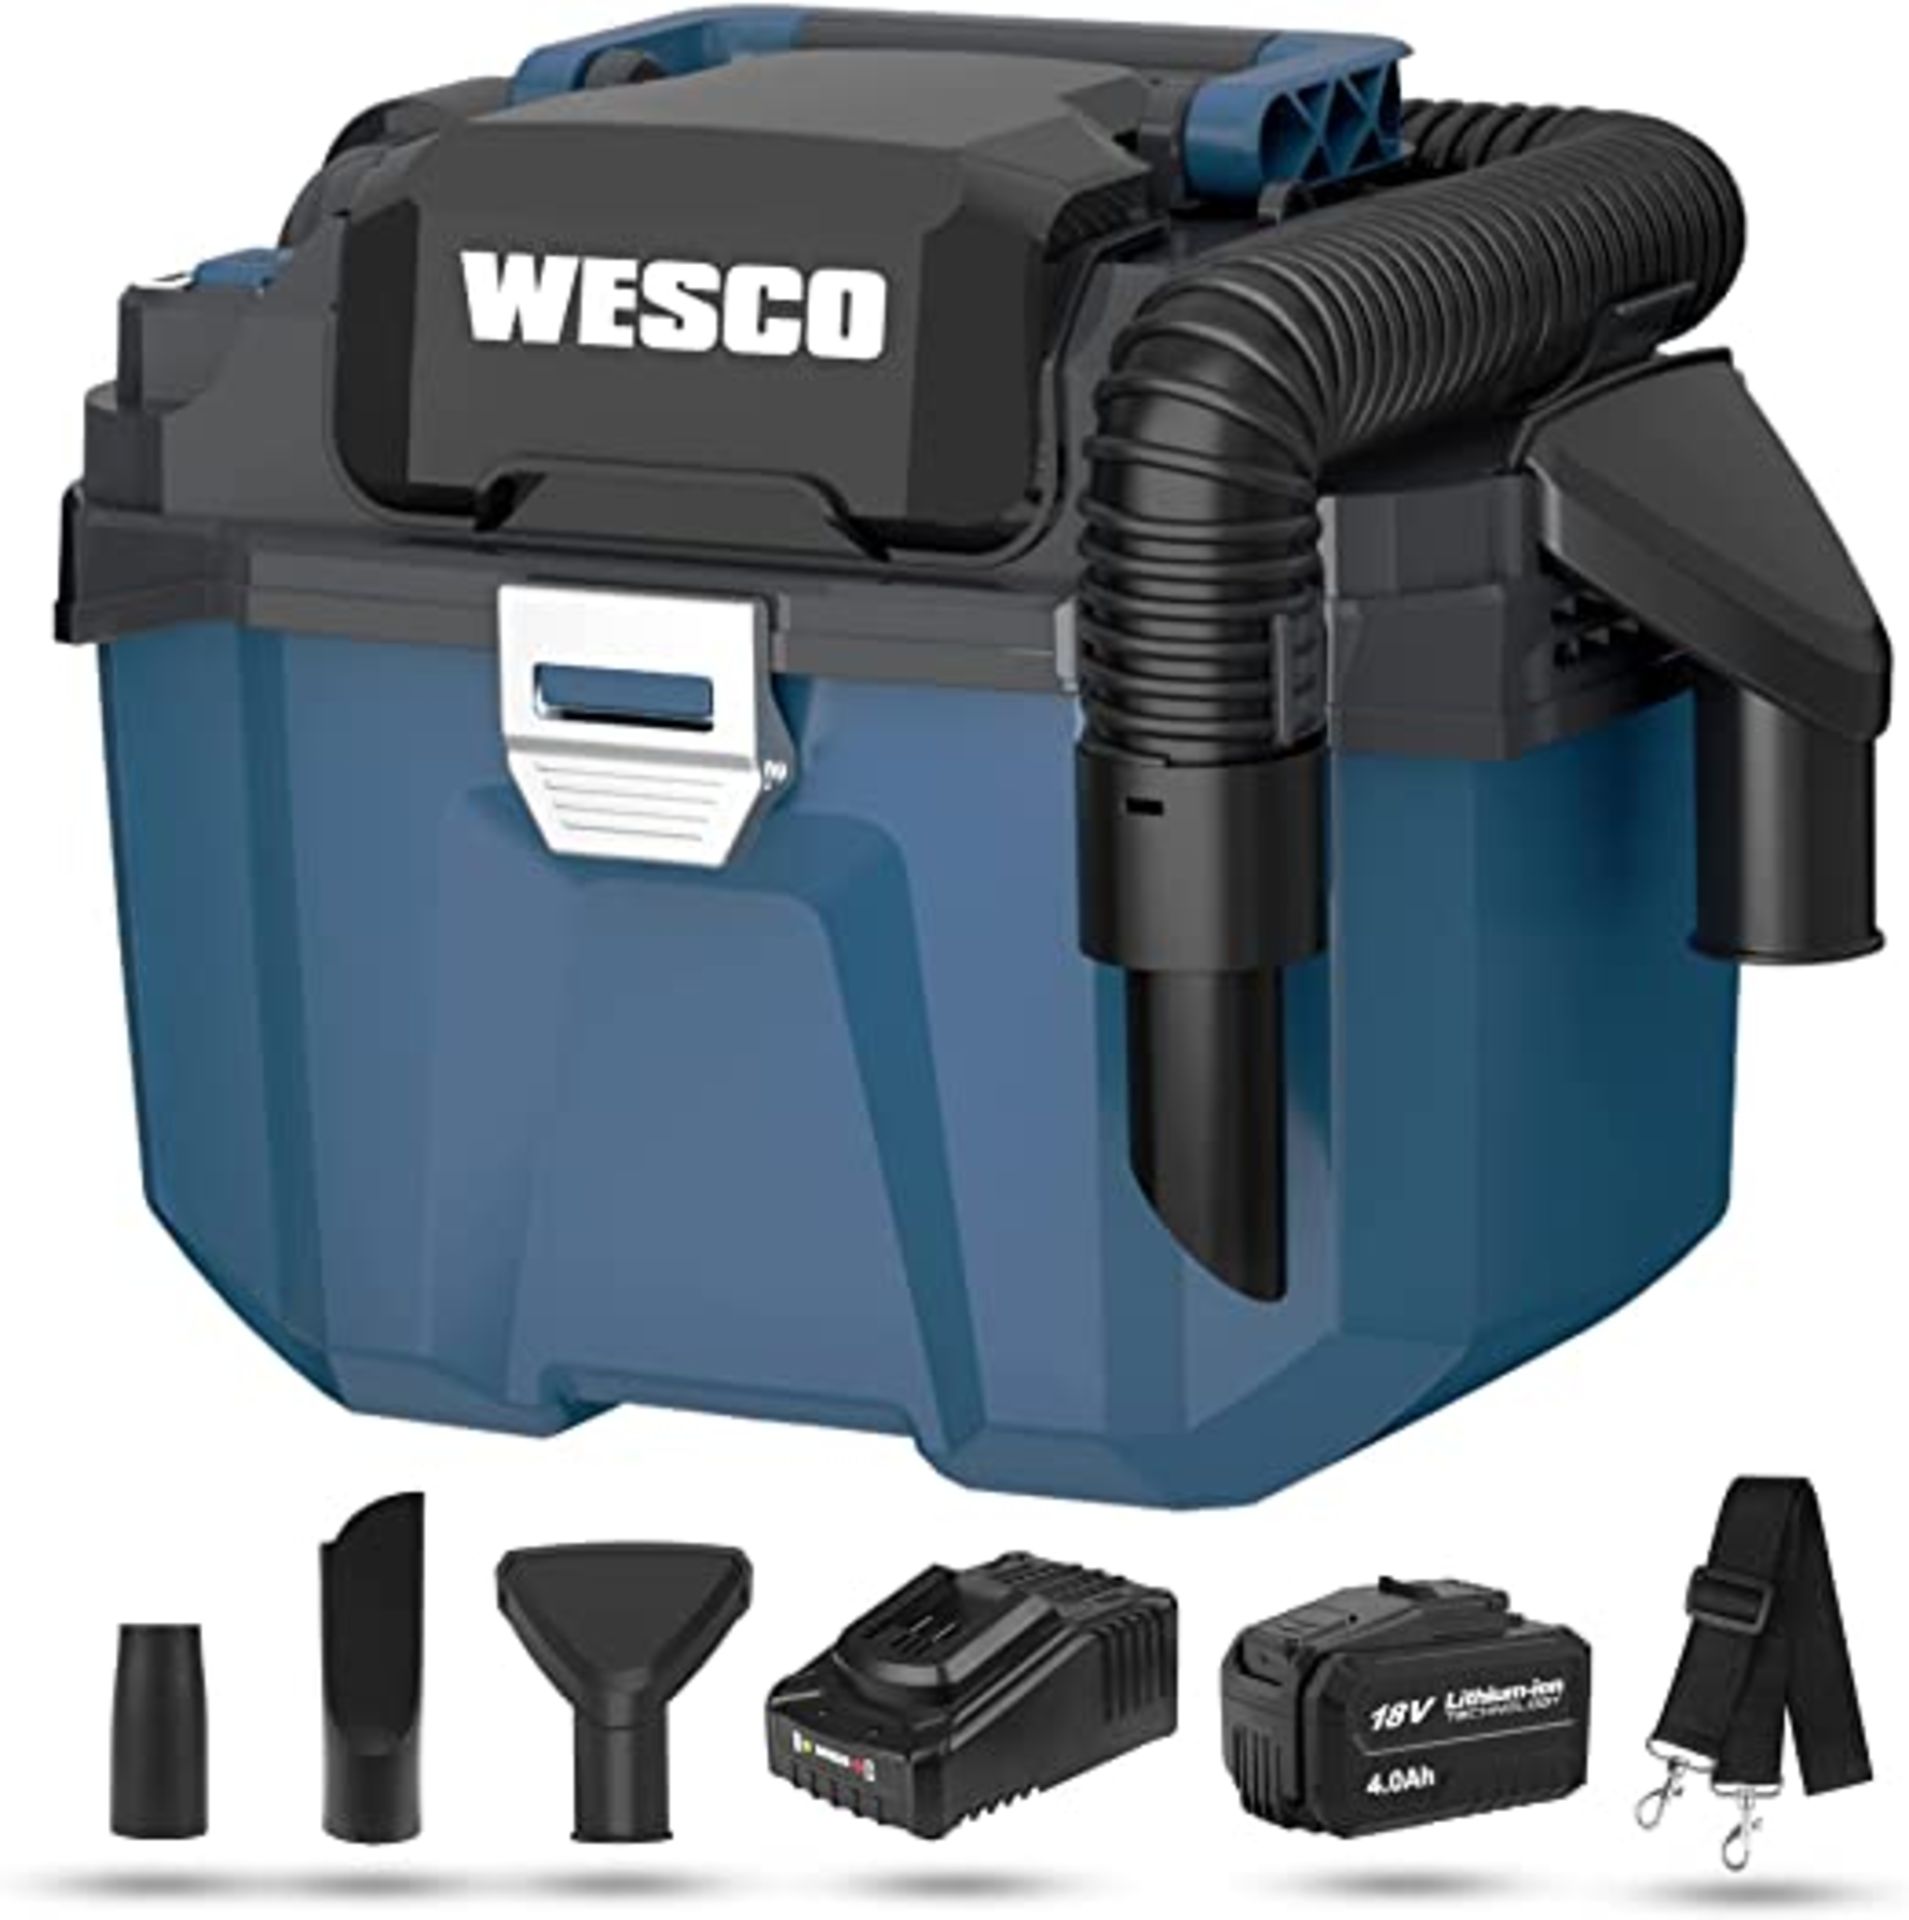 New Boxed WESCO 18v Wet and Dry Vacuum Cleaner, Cordless Wet Dry Vacuum Cleaner, 3.6 kg Compact